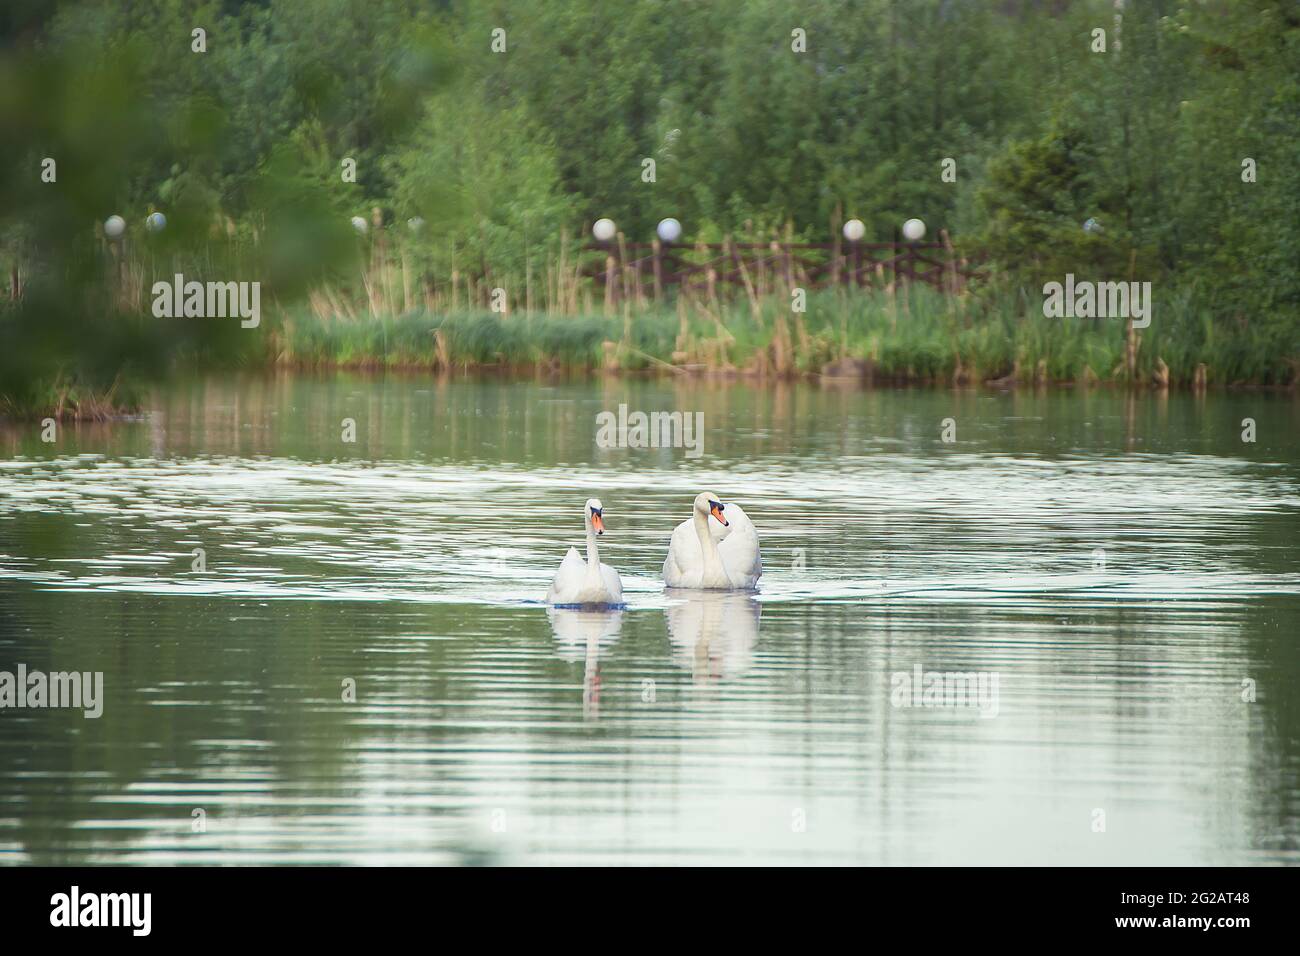 Two white swans gracefully swim along the lake side by side. Natural photography with wild birds. Beauty in nature. Warm spring day Stock Photo